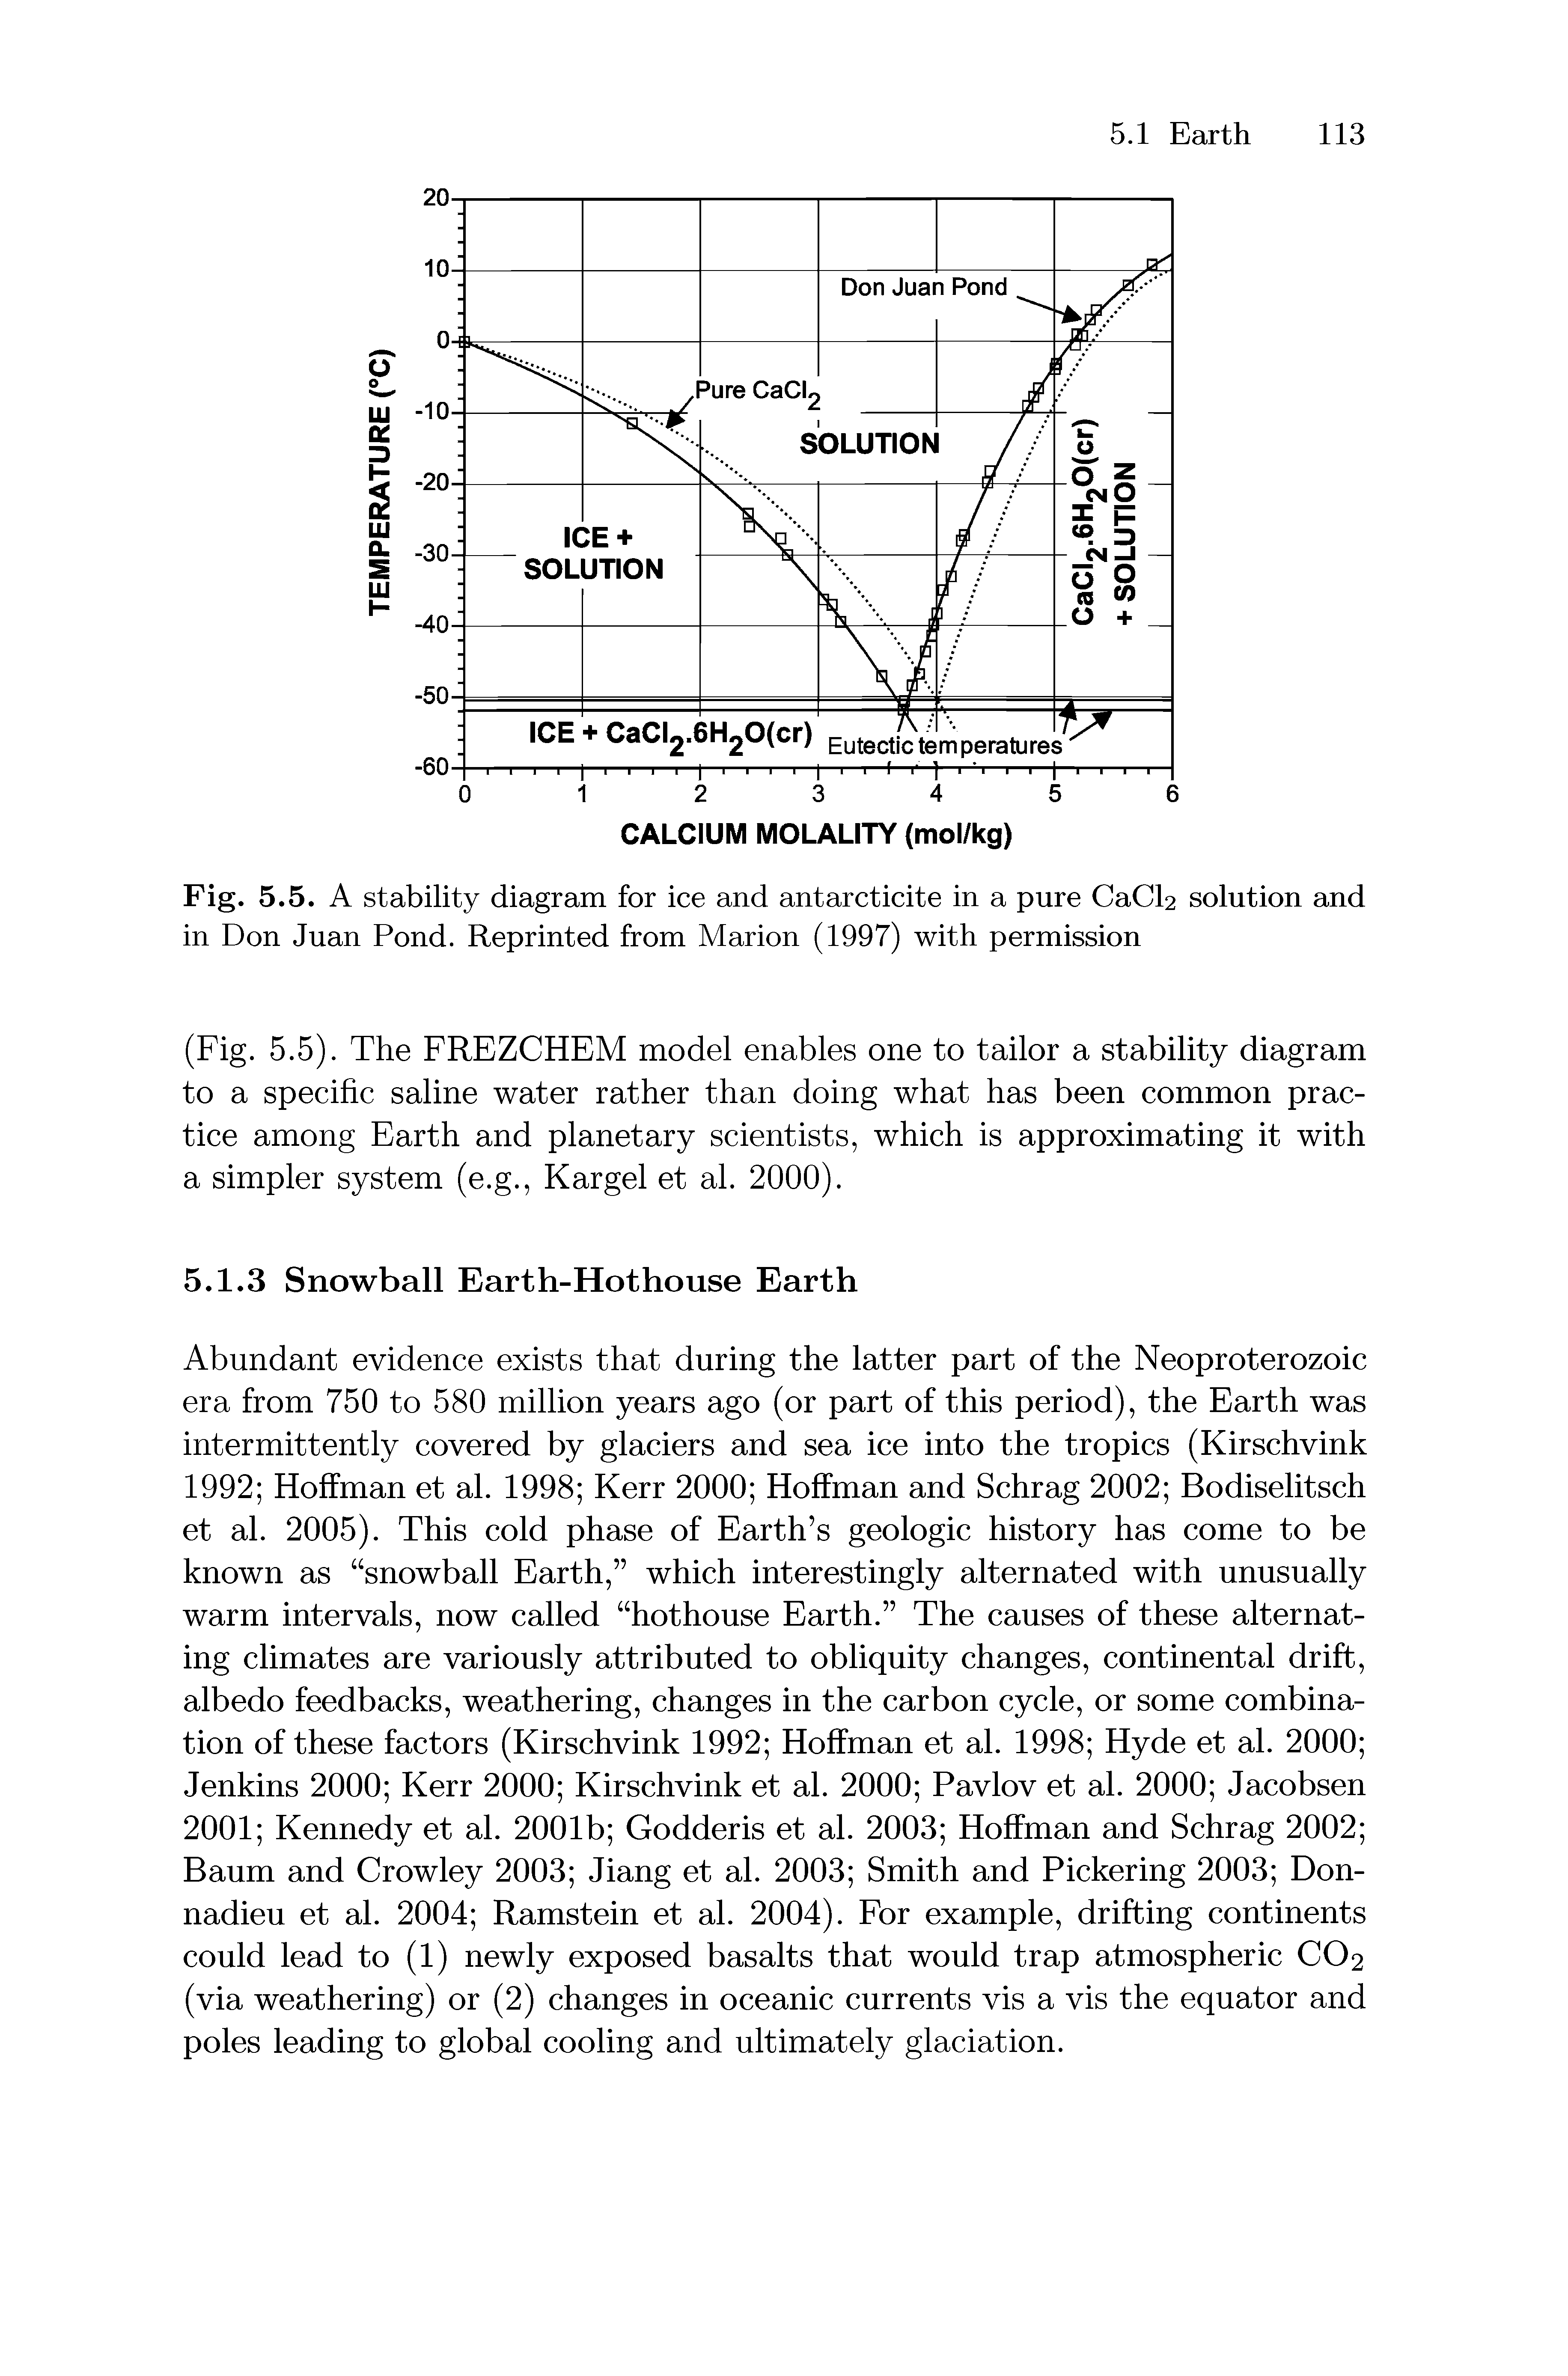 Fig. 5.5. A stability diagram for ice and antarcticite in a pure CaCD solution and in Don Juan Pond. Reprinted from Marion (1997) with permission...